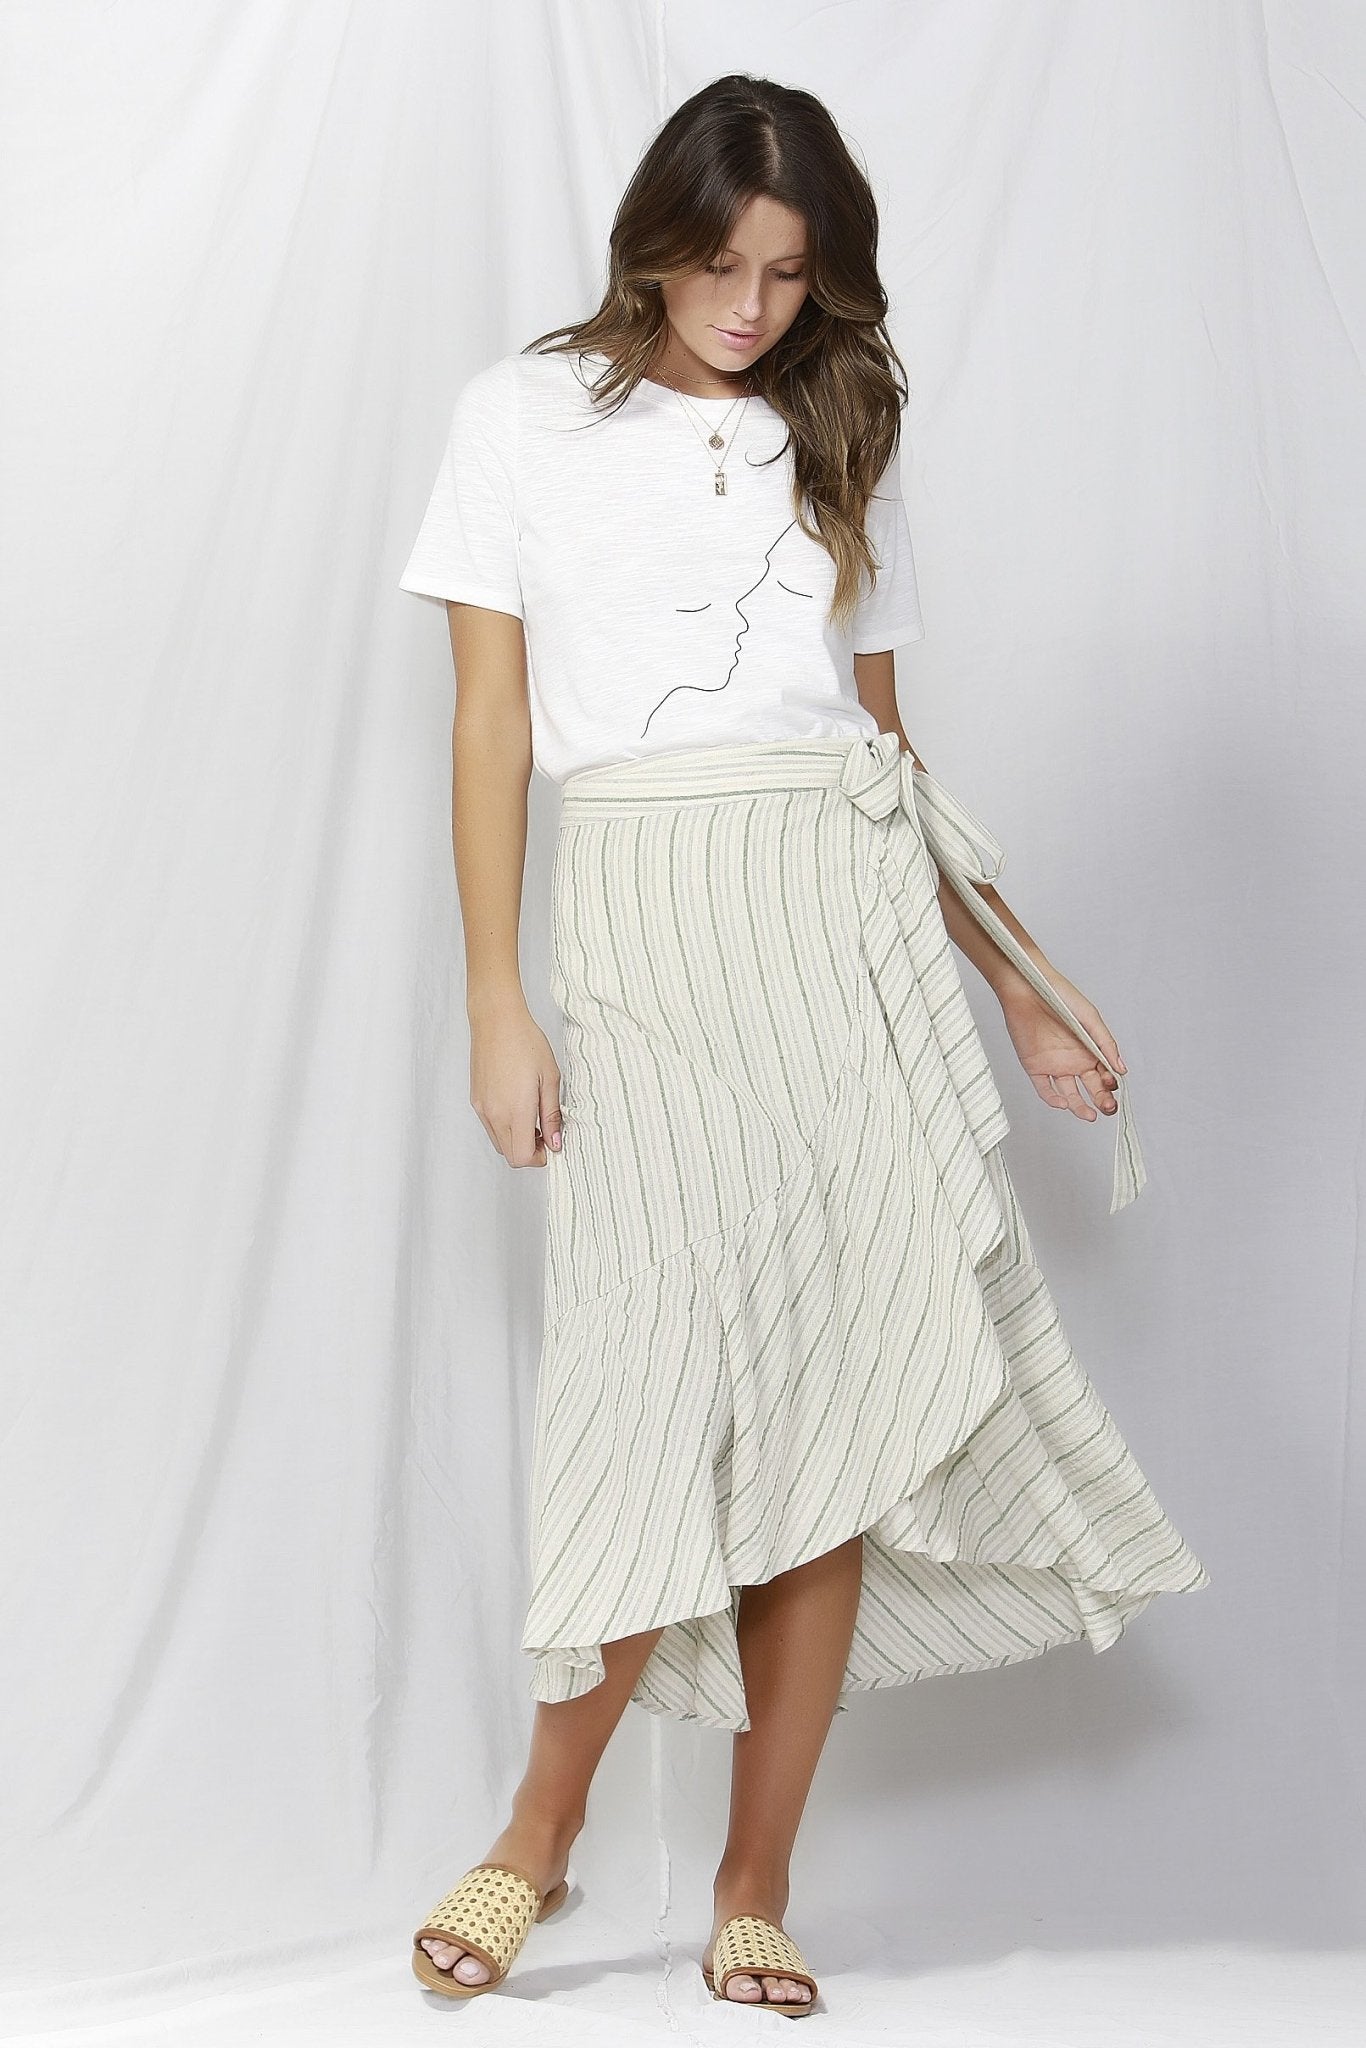 Fate + Becker Naples Linen Frilled Skirt in Stripe SIZE 8 and 10 ONLY - Hey Sara